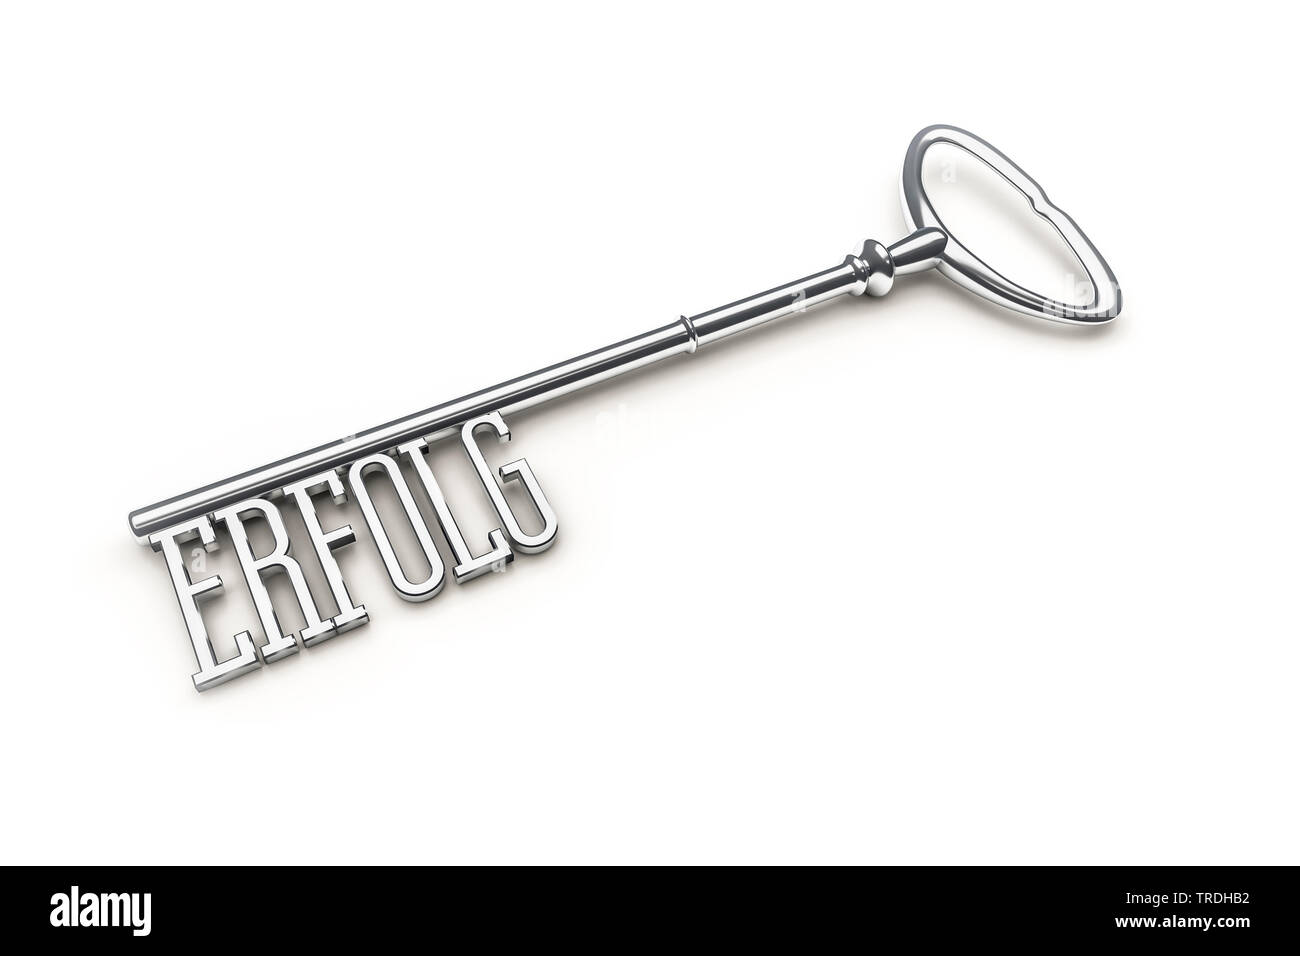 3D computer graphic, nostalgic key with lettering ERFOLG (Success) as key bit Stock Photo